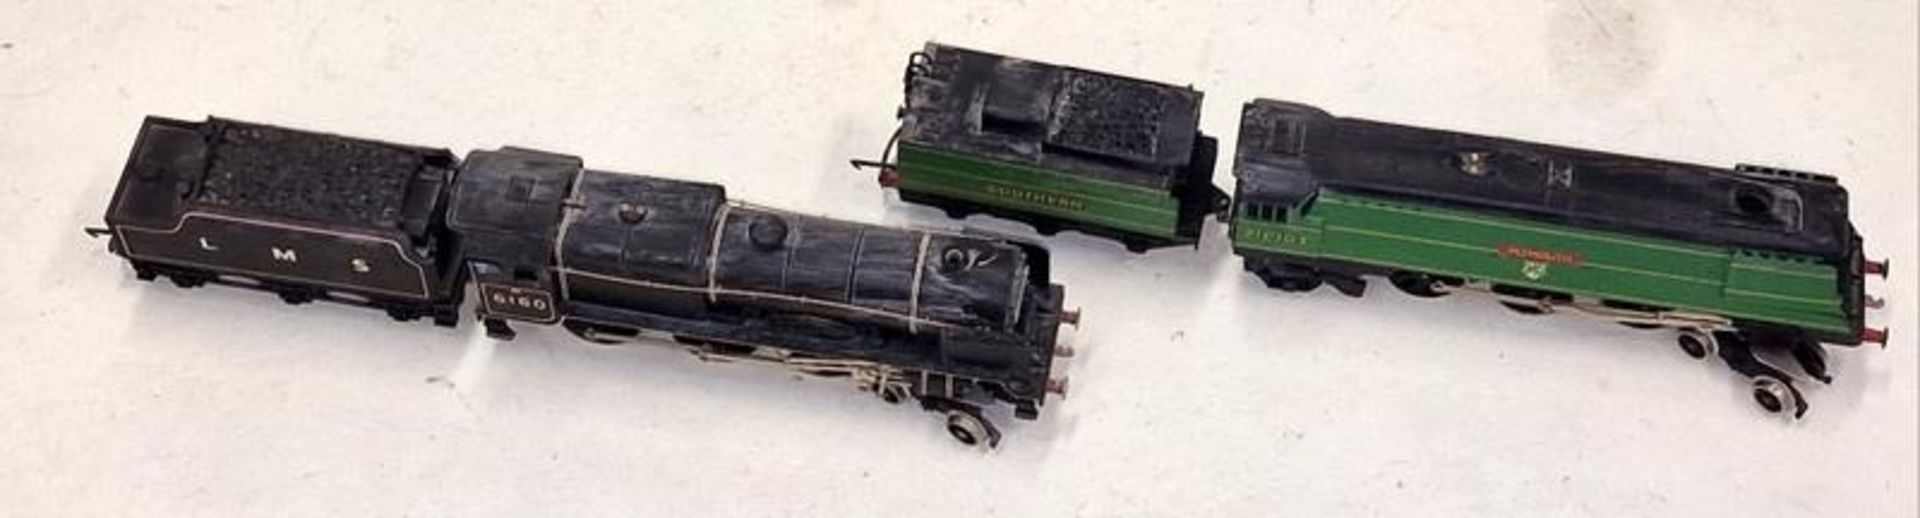 Two OO Gauge Locomotives to include Plymouth 21C103 and LMS Queen Victorias rifle men 6160 - - Image 2 of 4